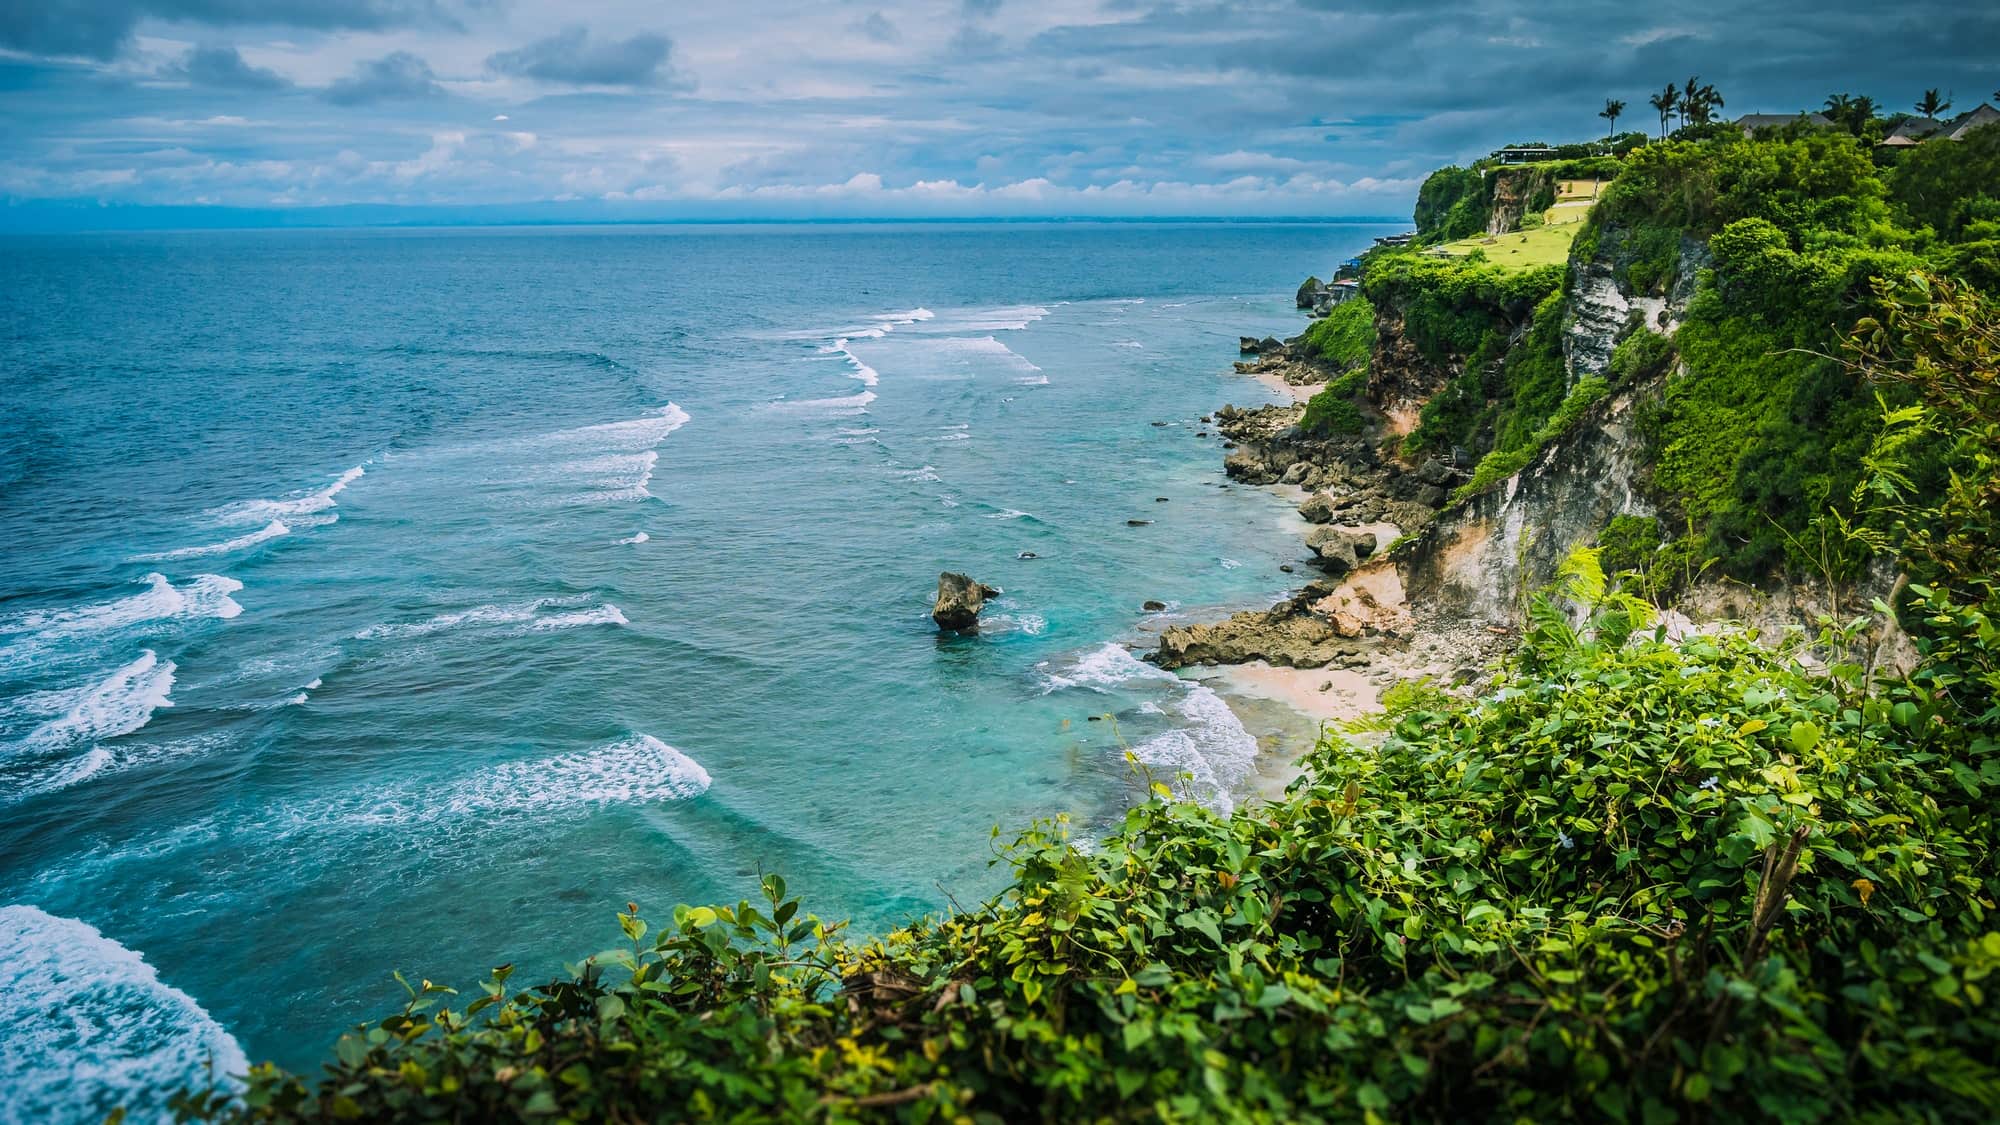 Overlooking Impossible beach in Bali, Indonesia